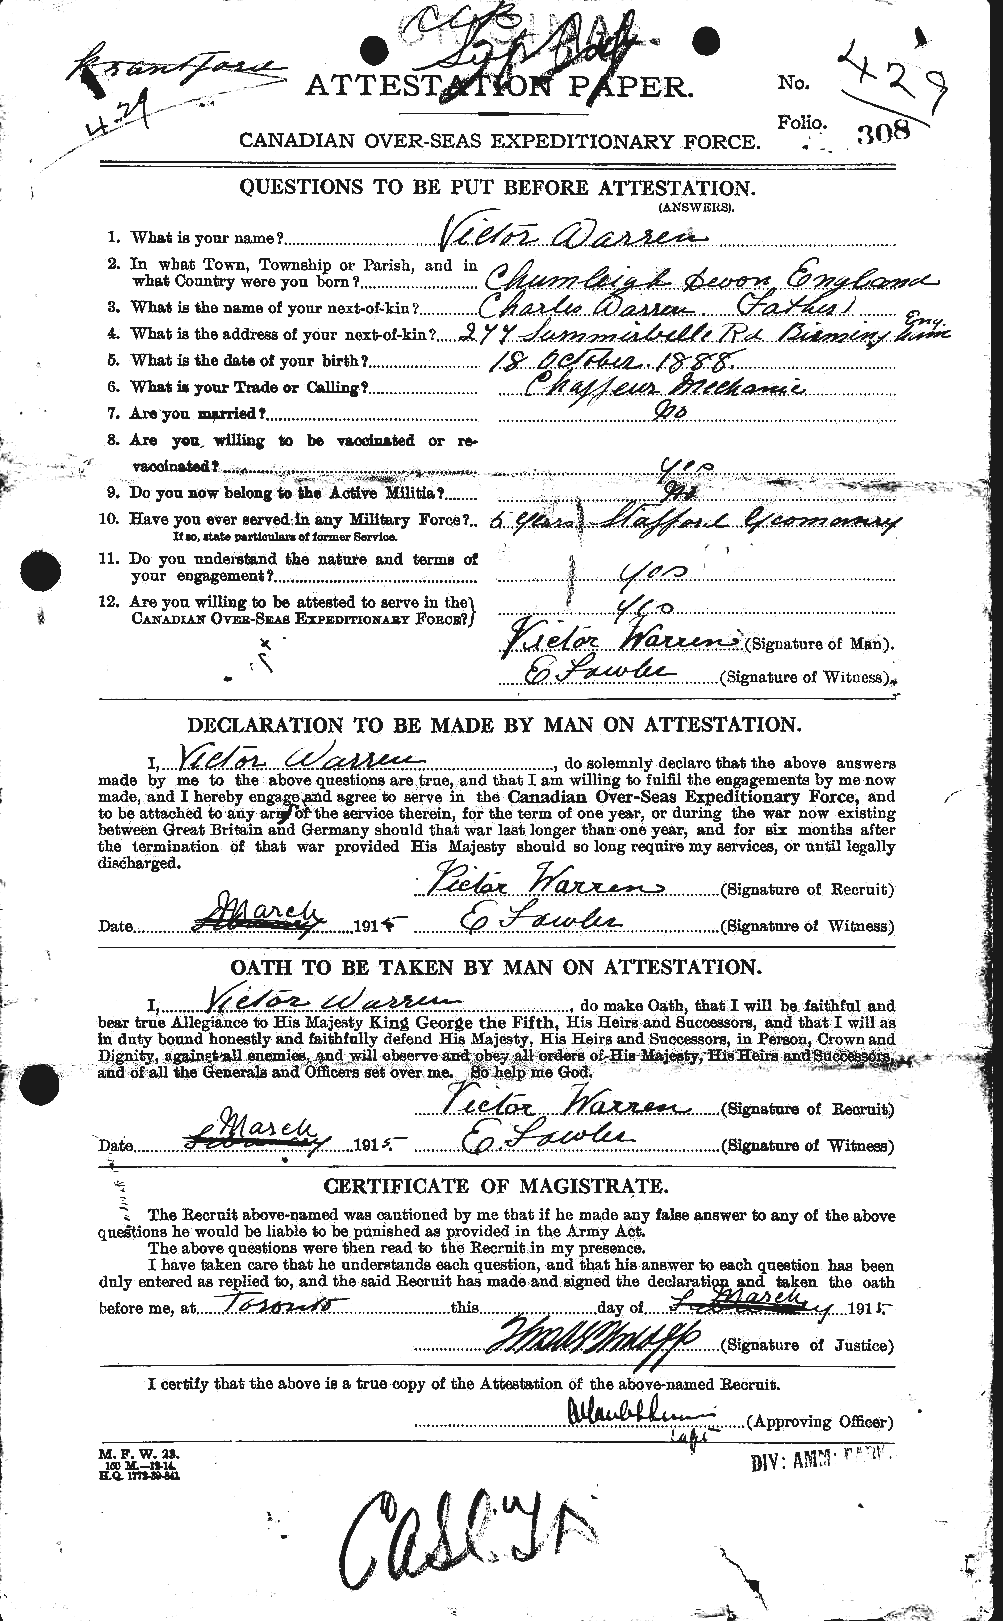 Personnel Records of the First World War - CEF 658650a